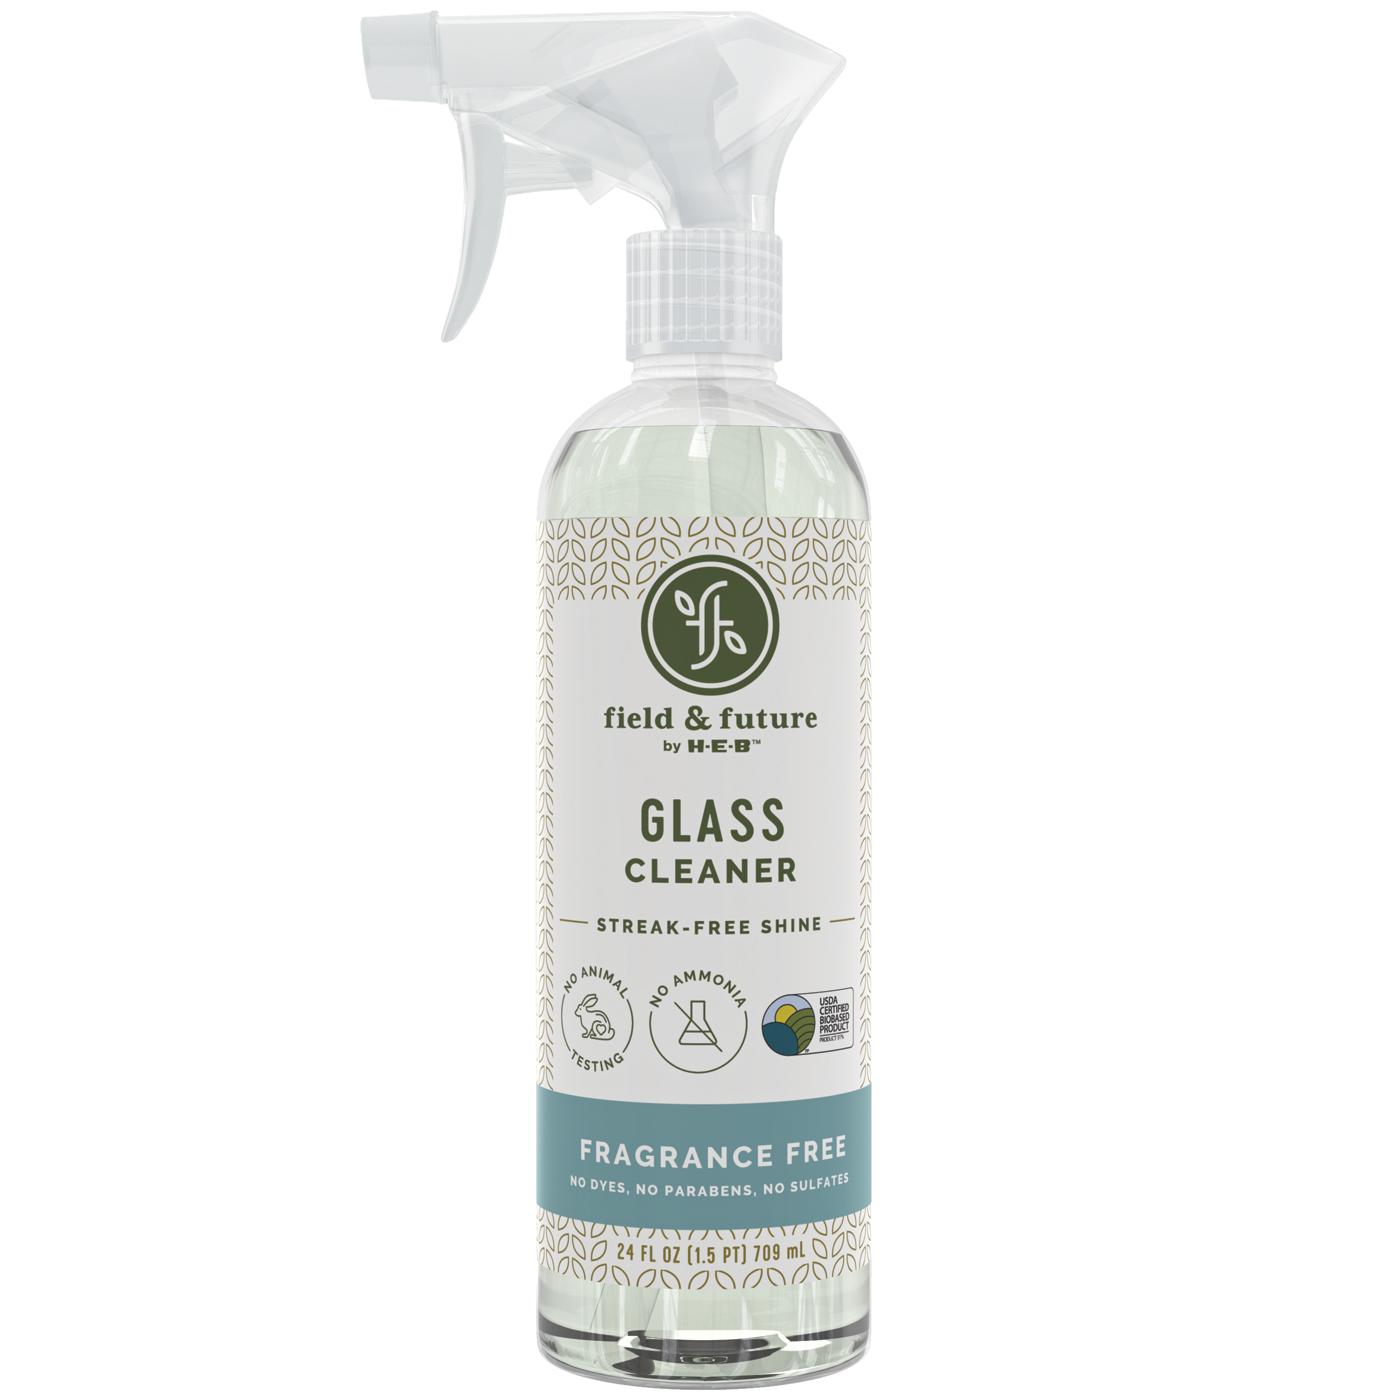 Field & Future by H-E-B Glass Cleaner - Fragrance Free; image 1 of 3